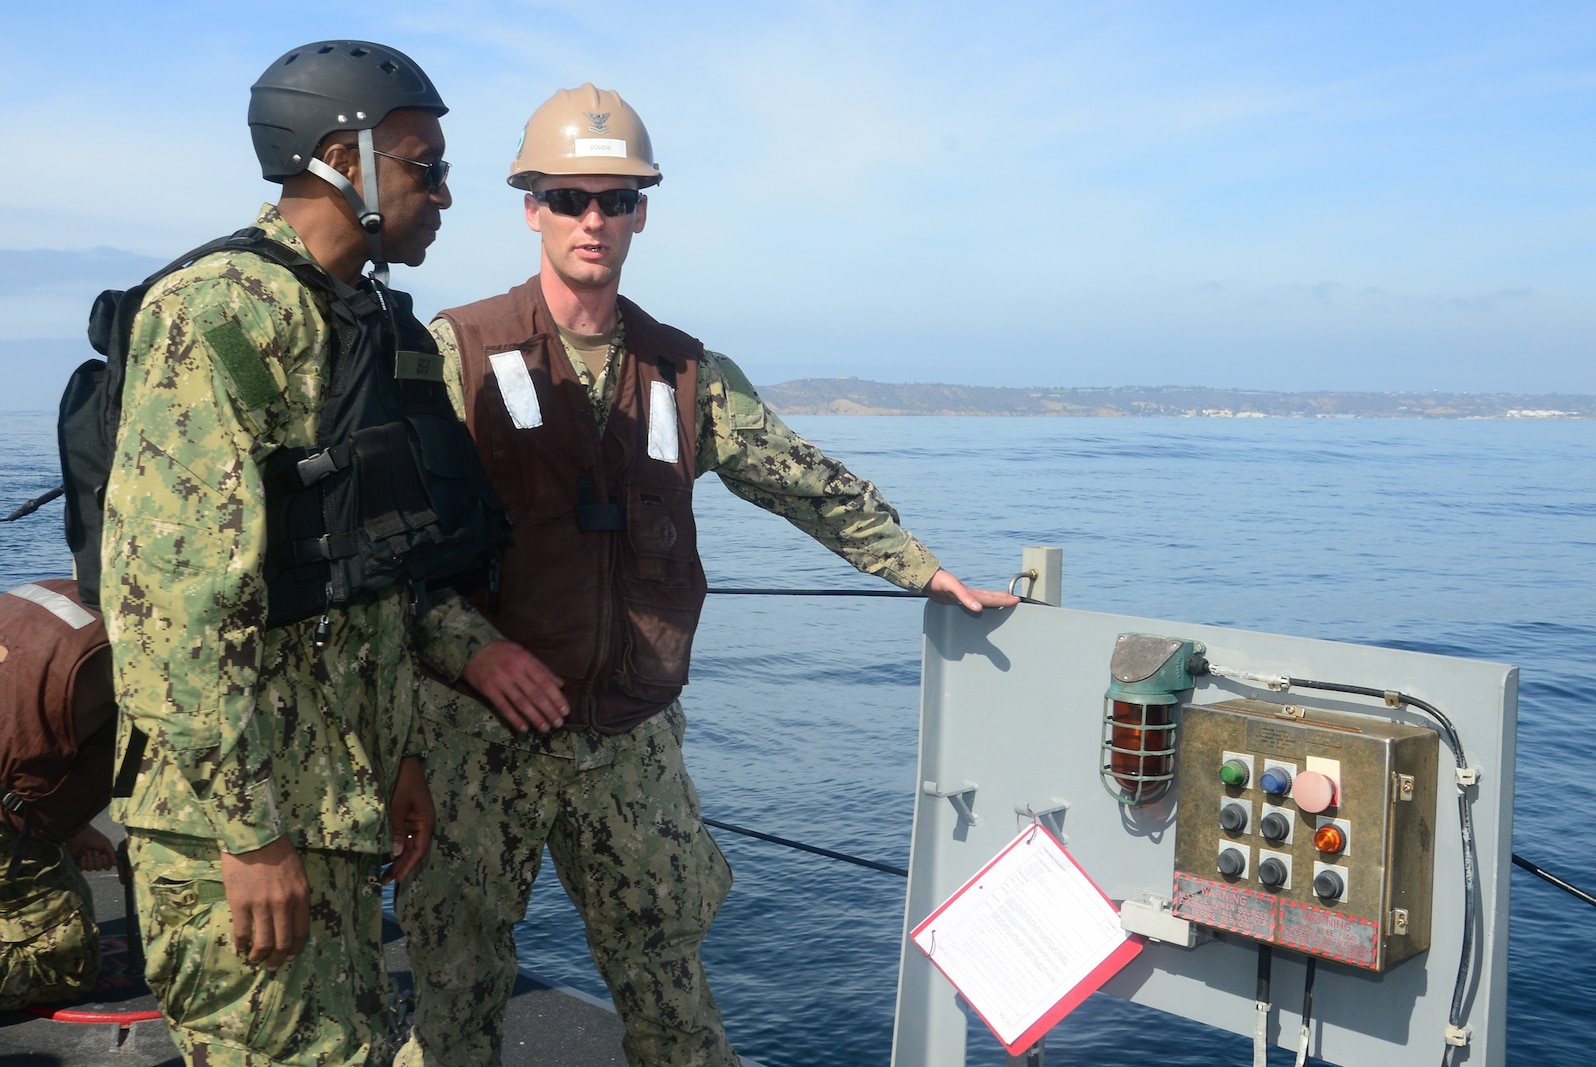 Engineman 2nd Class Jesse Couch, assigned to Amphibious Construction Battalion One, describes the operations of the beach module of Improved Navy Lighterage System Causeway Ferry 17 to Rear Adm. Frank Ponds, commander of Expeditionary Strike Group Three, during exercise Brilliant Scepter 2014. Brilliant Scepter 2014 is an exercise providing ship-to-shore transportation of combat cargo for Navy amphibious forces and the Marine Corps.